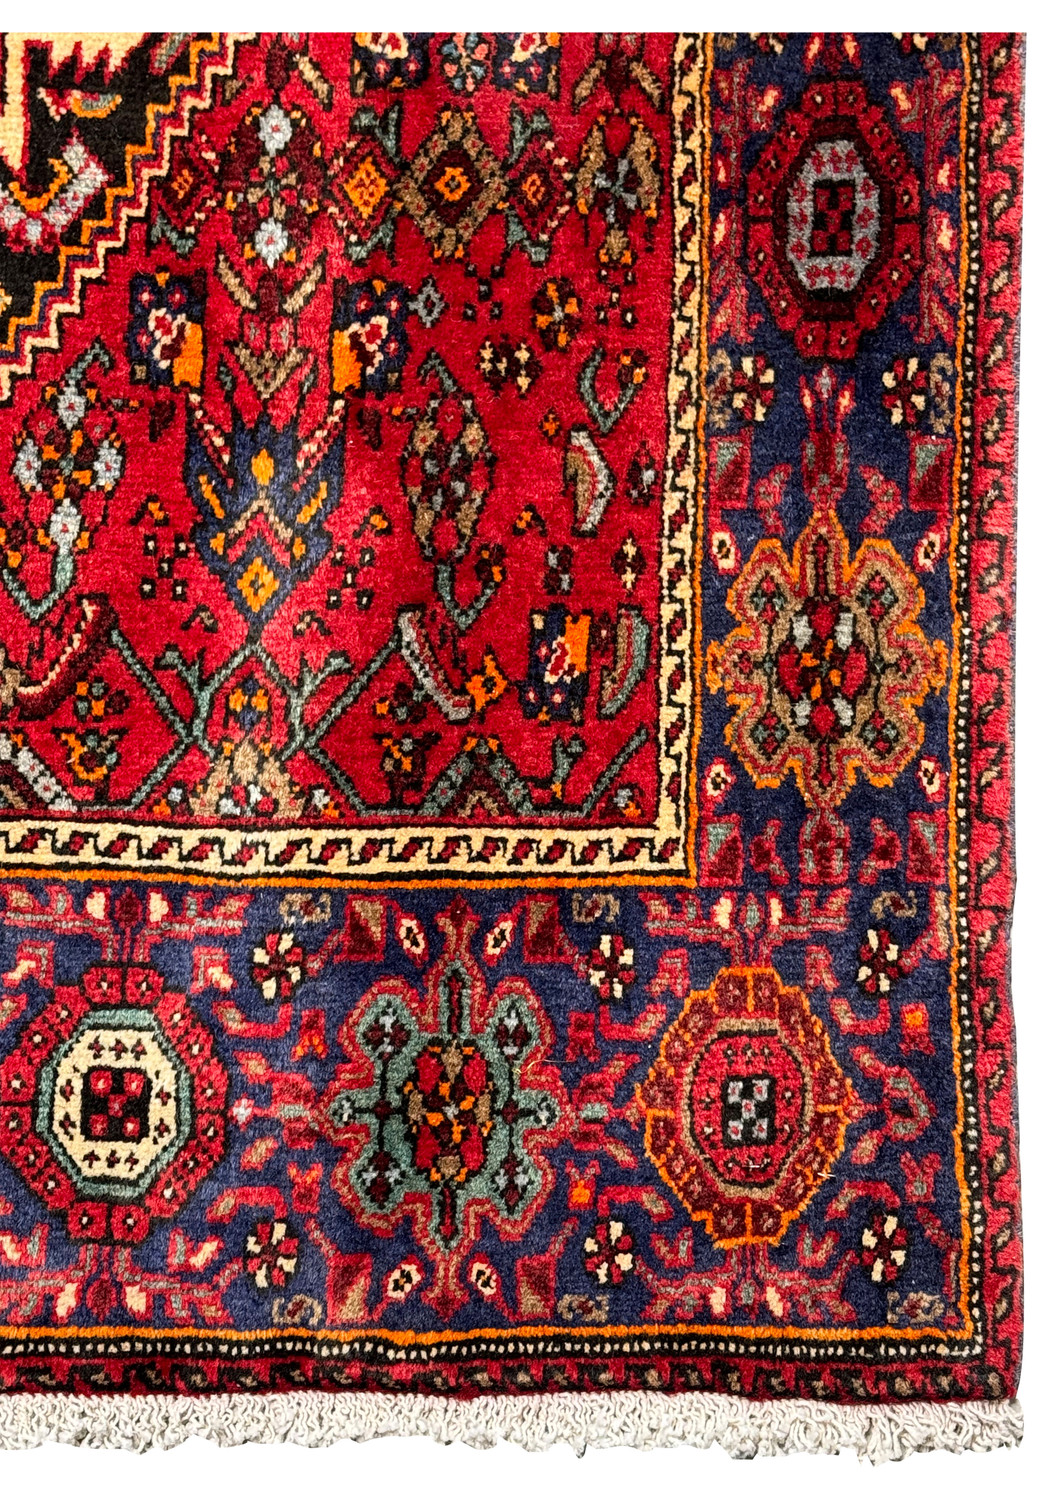 Corner detail of a 4x6 Persian Gholtogh rug highlighting the red and blue motifs